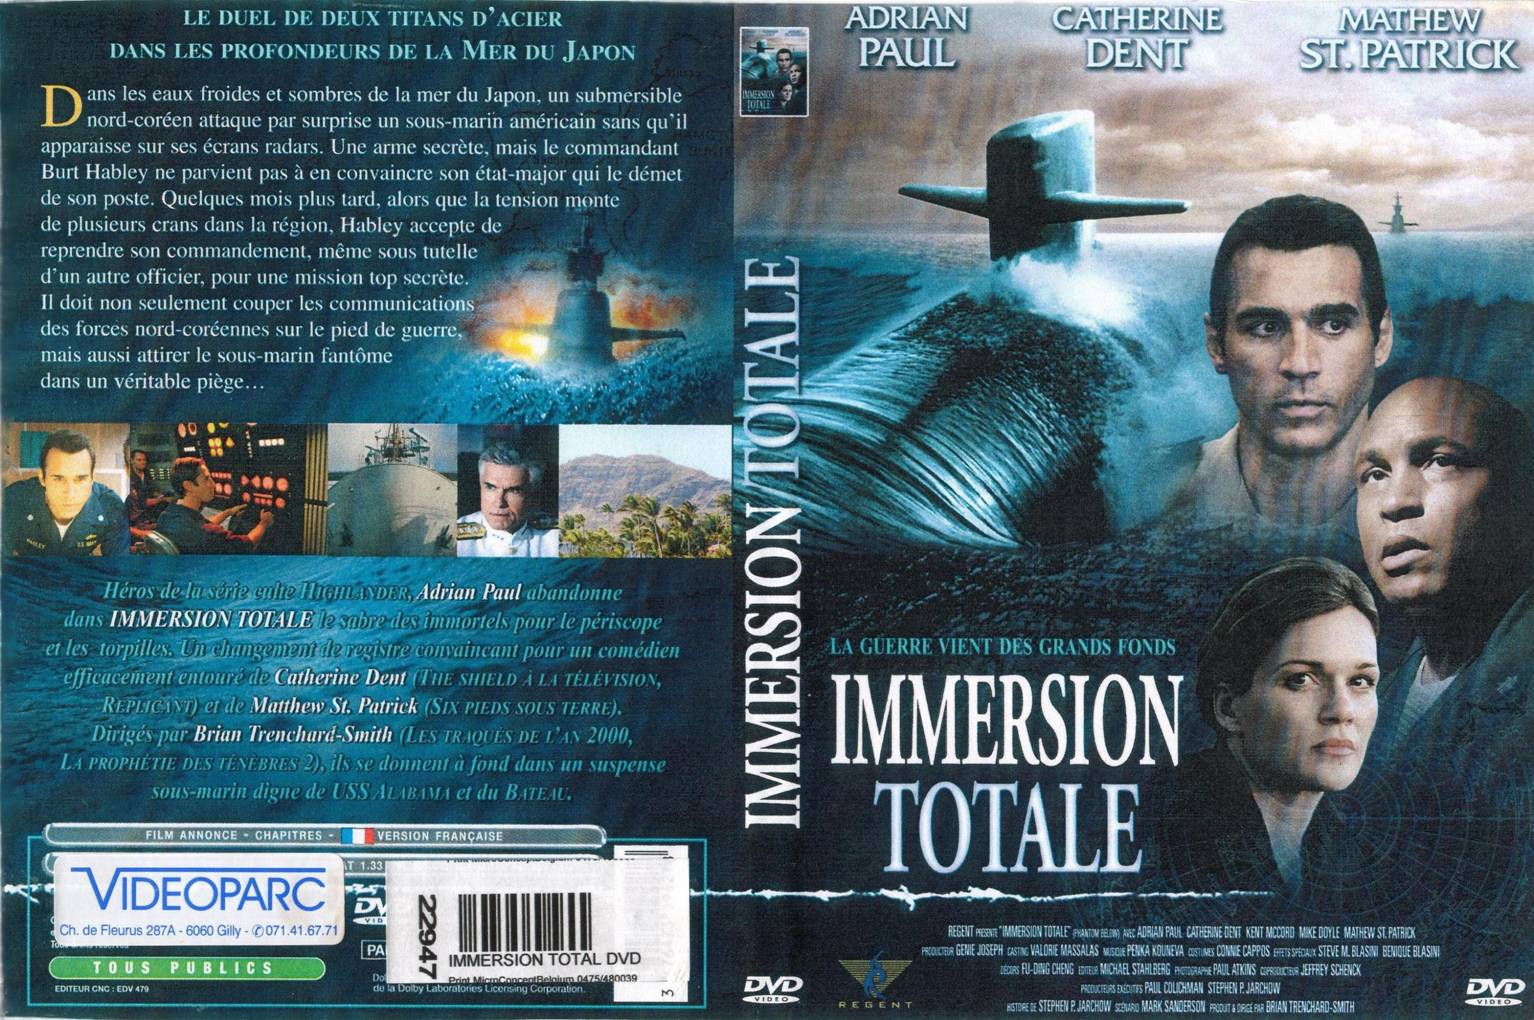 Jaquette DVD Immersion totale